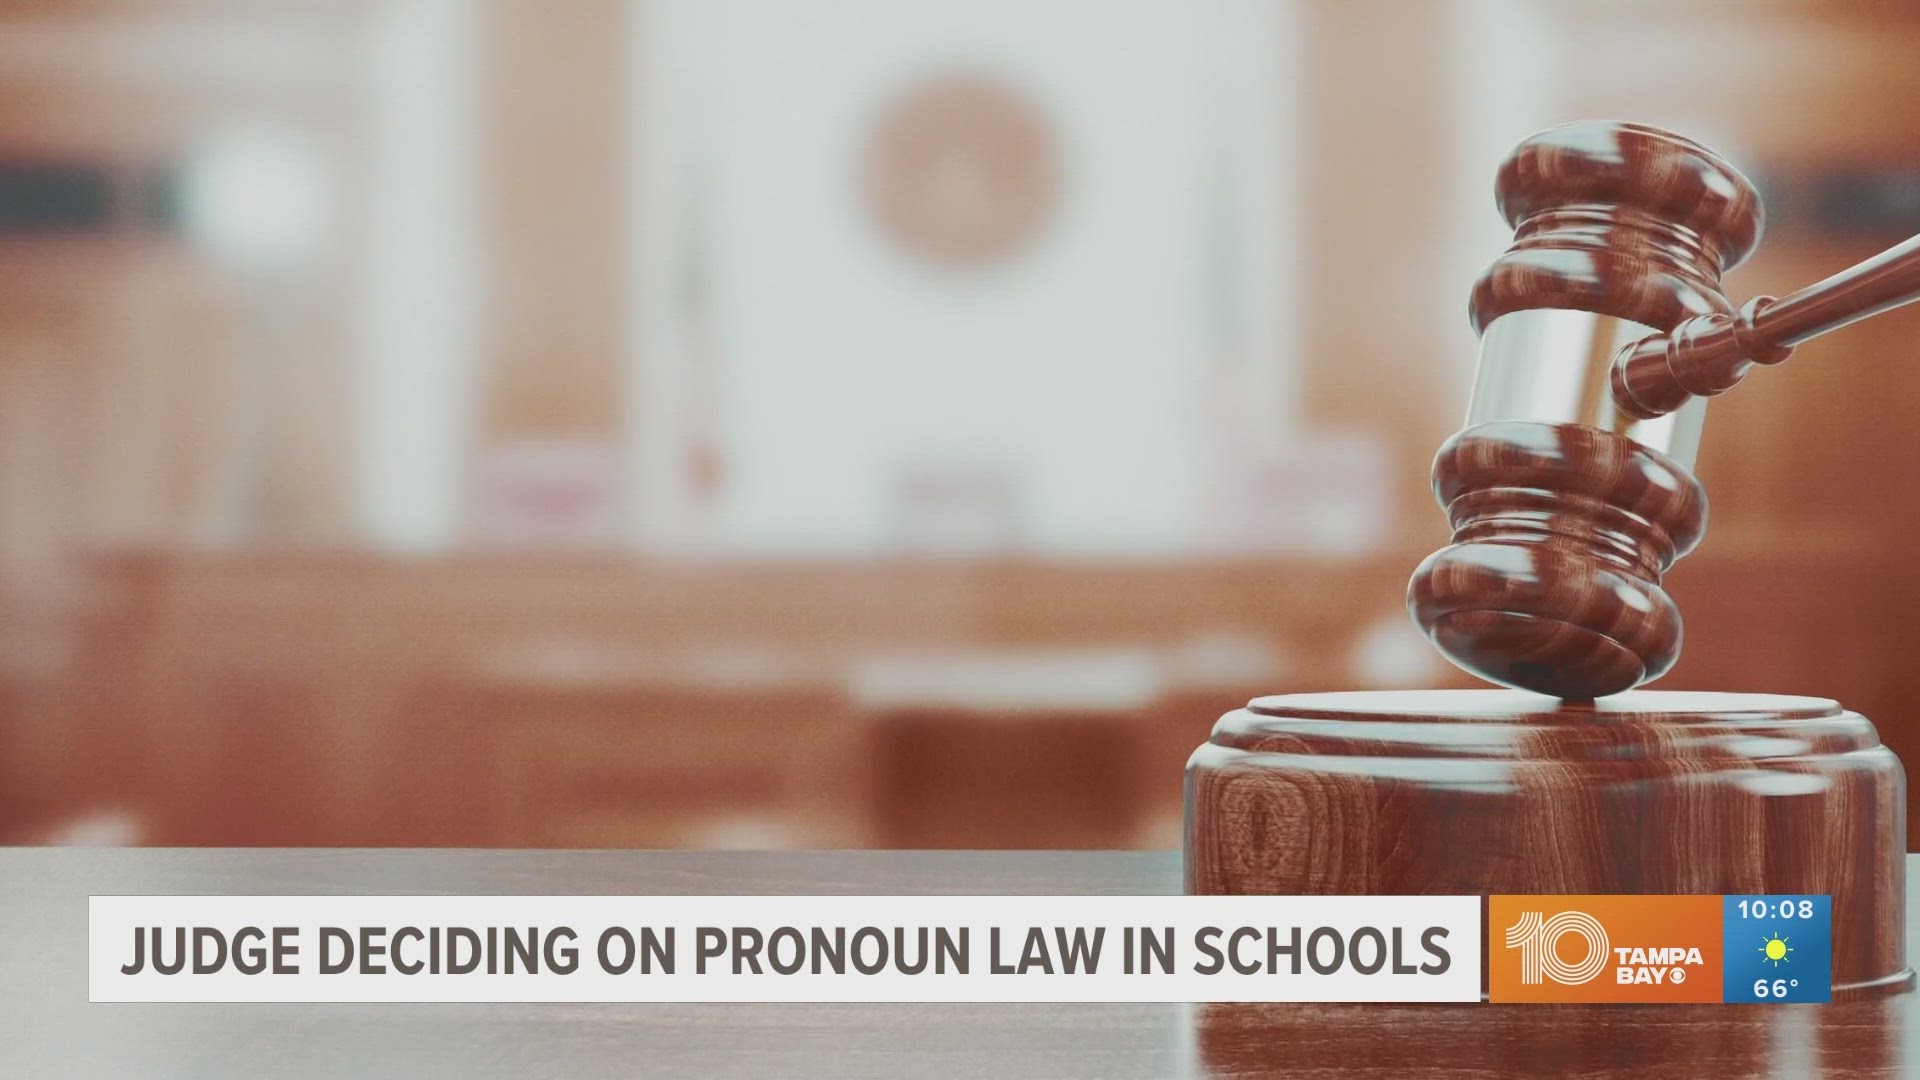 A transgender Hillsborough County County teacher and others are challenging the state of Florida over a law that restricts educators from using personal pronouns.